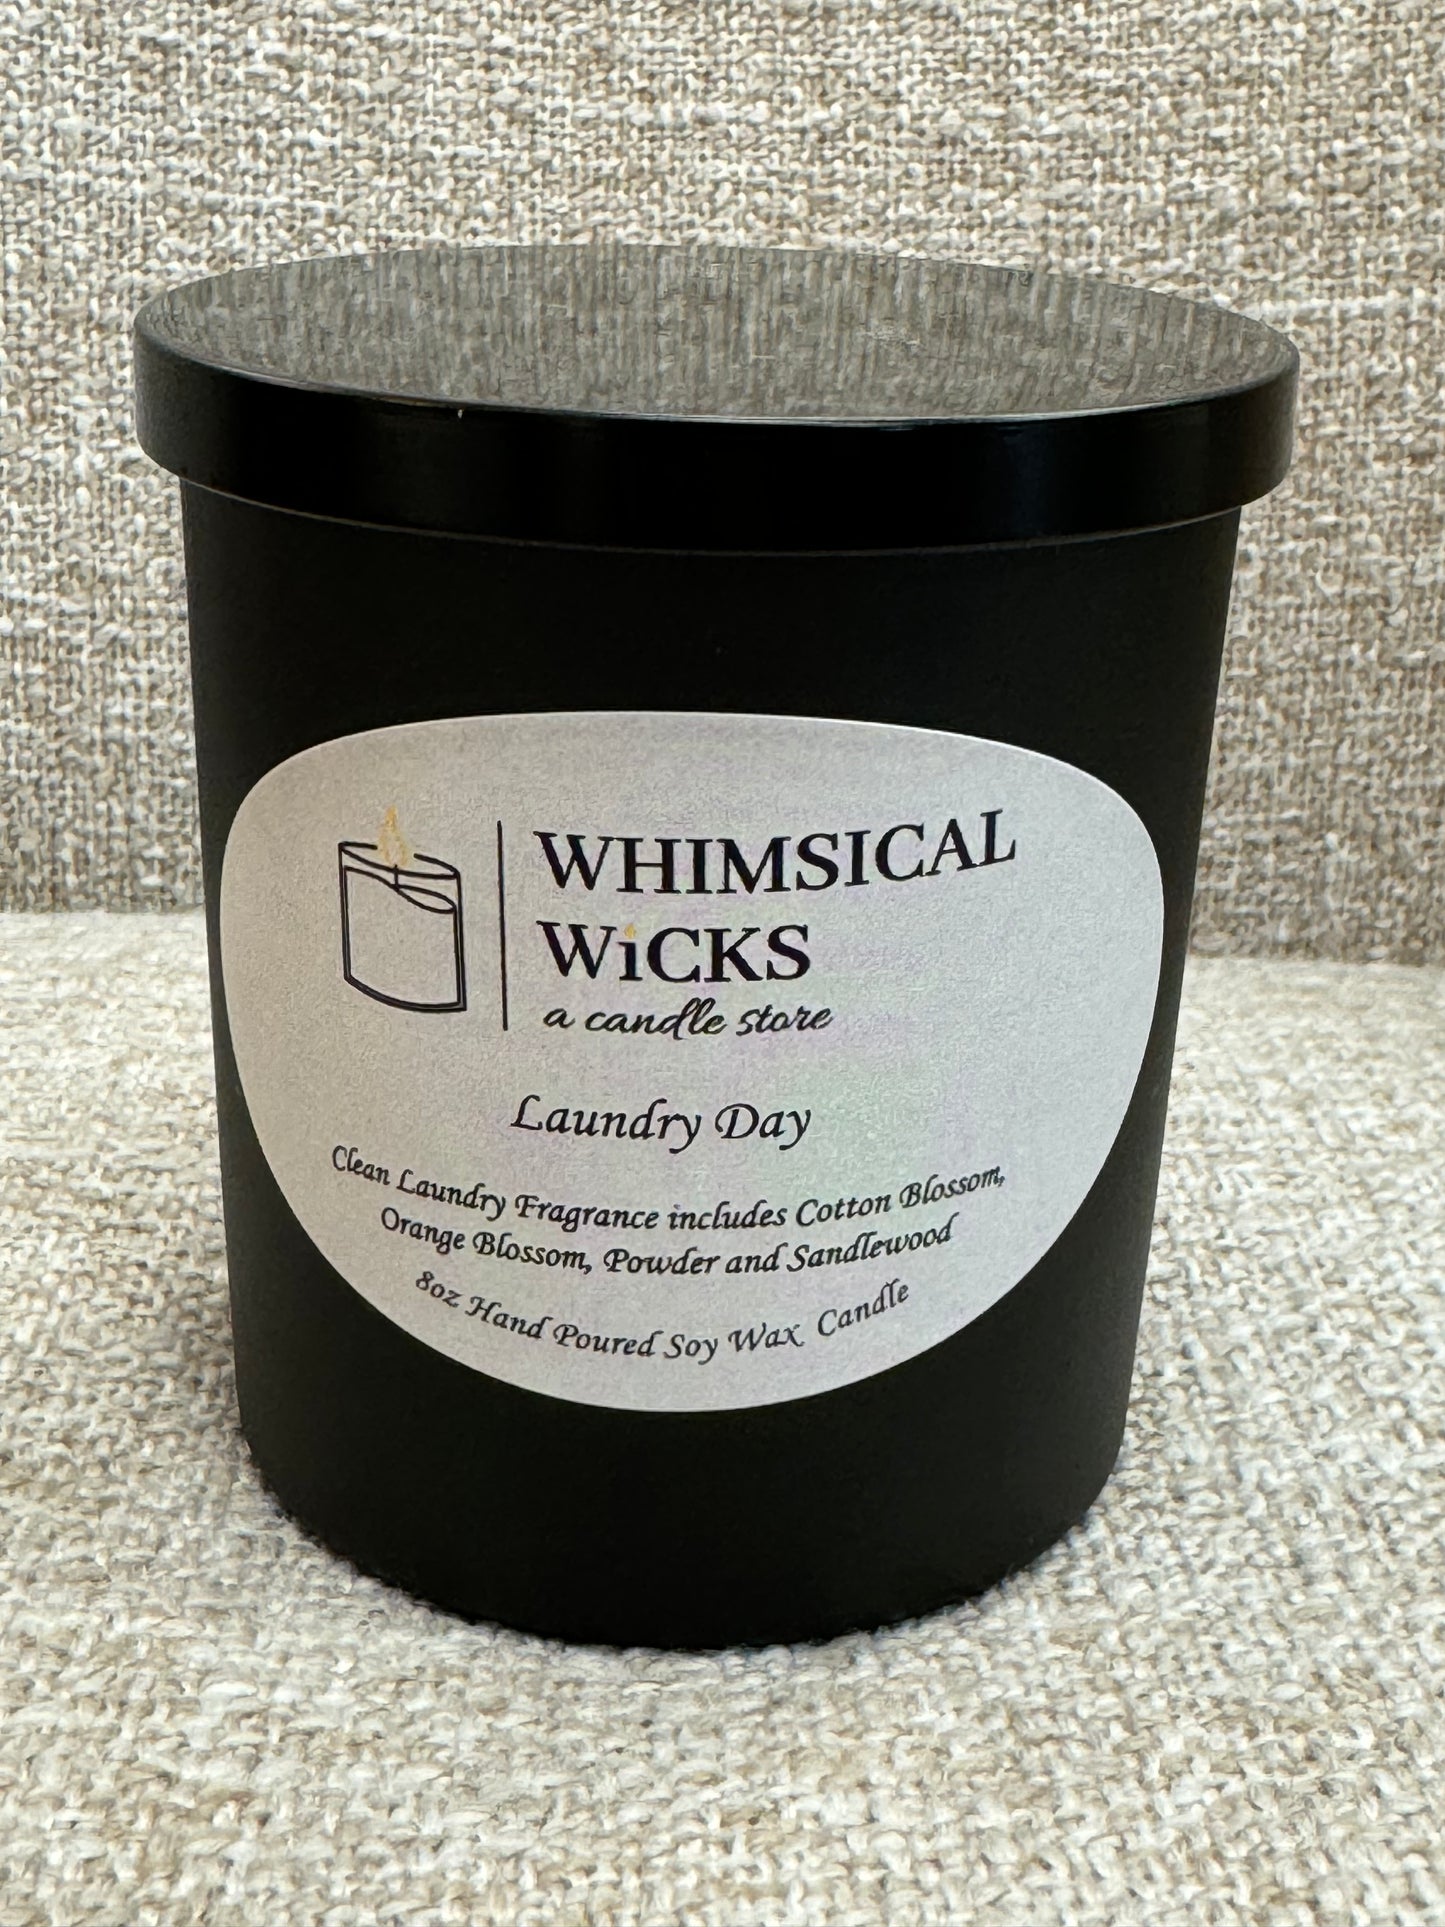 Whimsical Wicks - Laundry Day